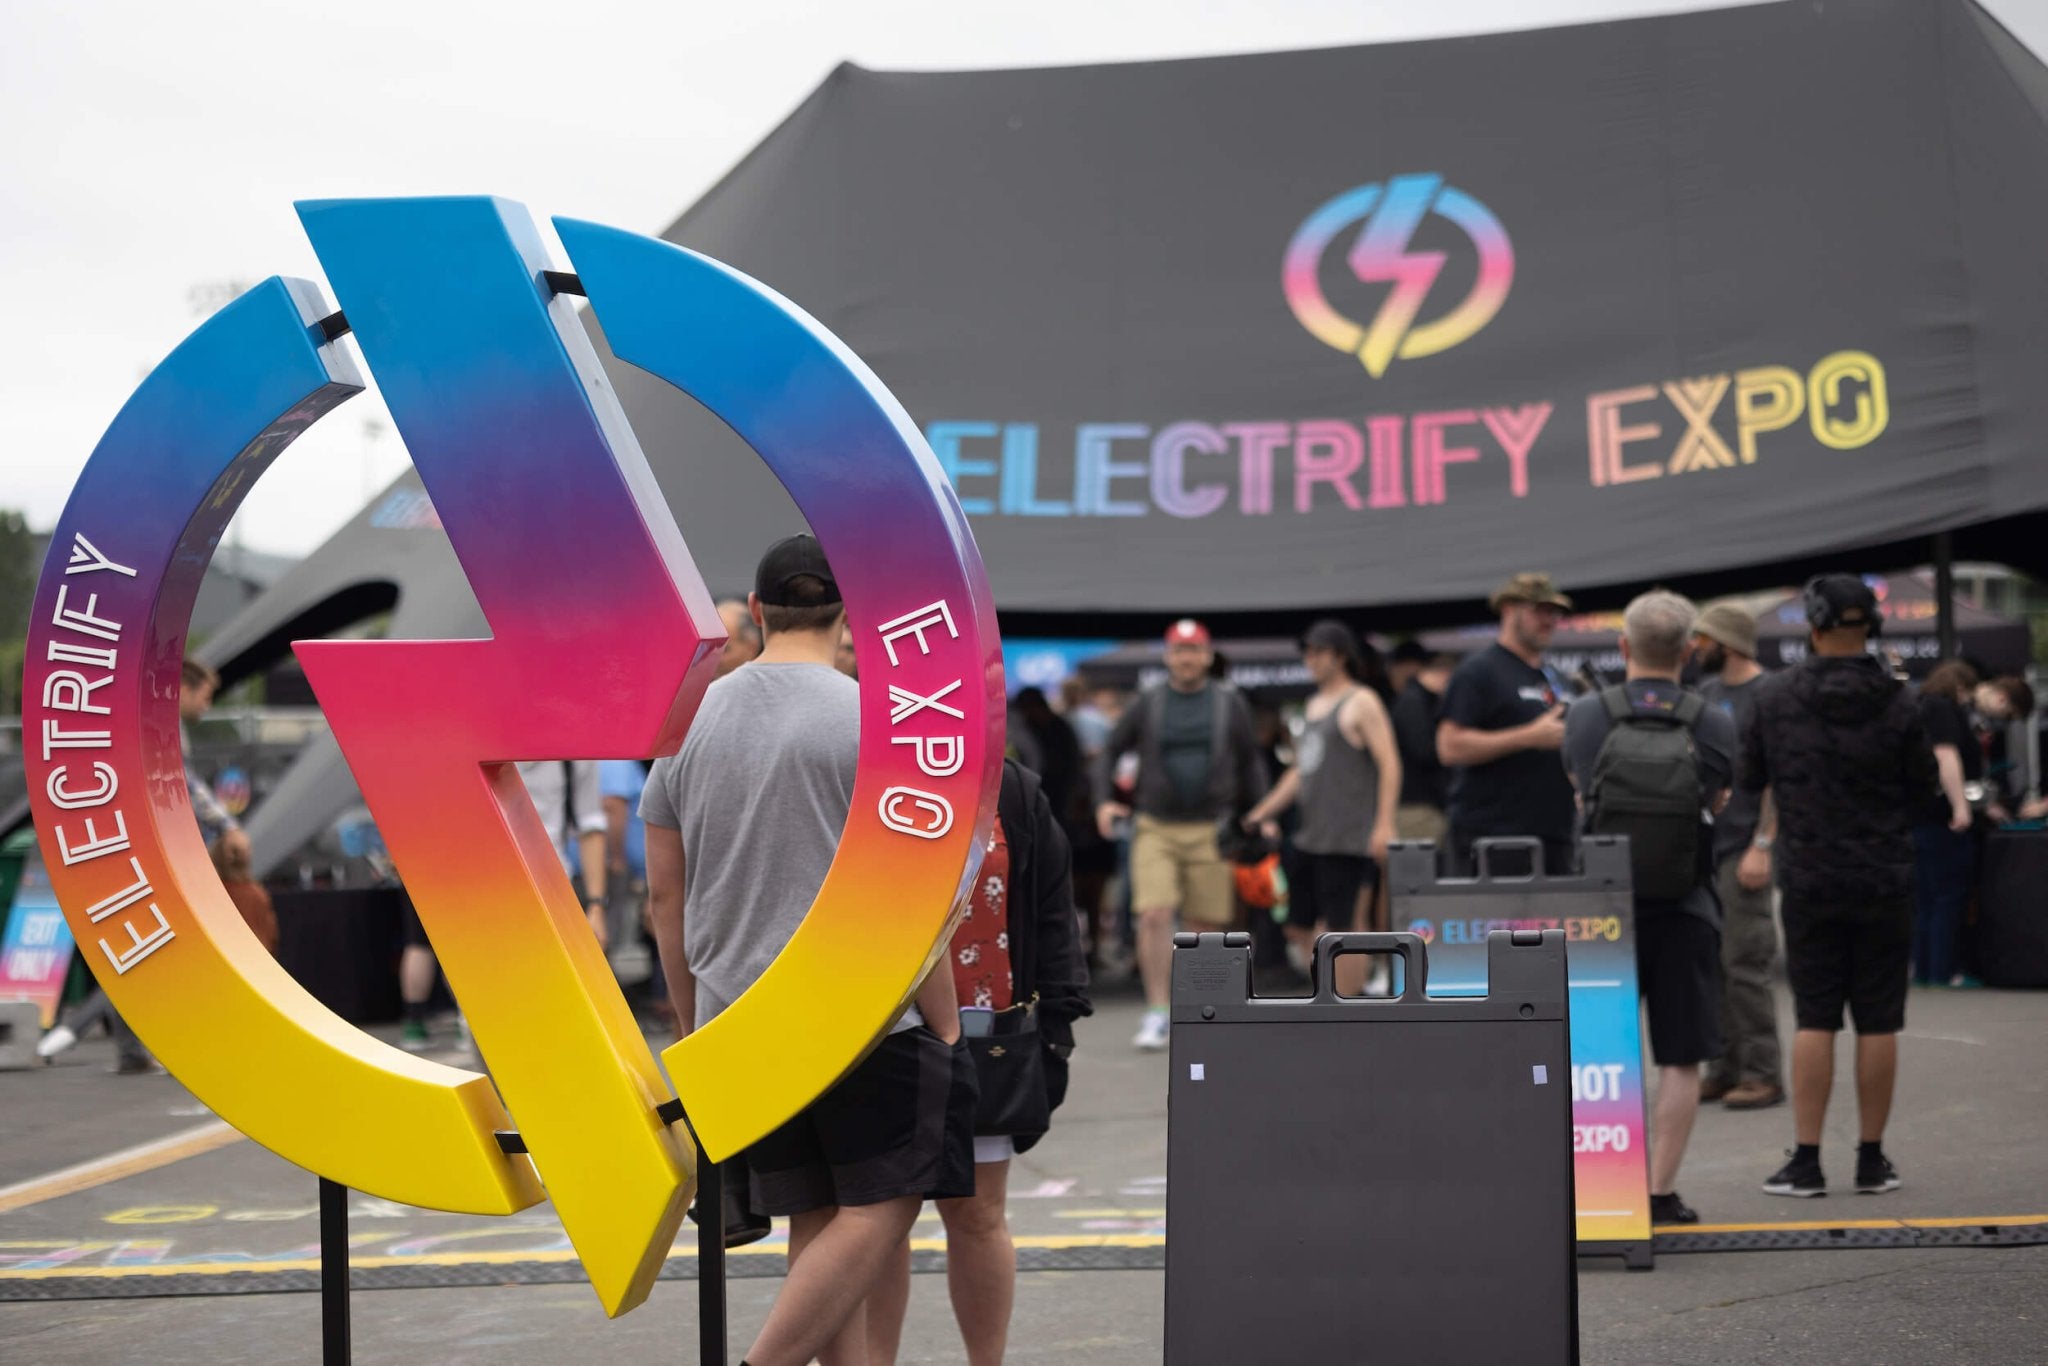 Catch GOTRAX at Electrify Expo in Long Beach - GOTRAX